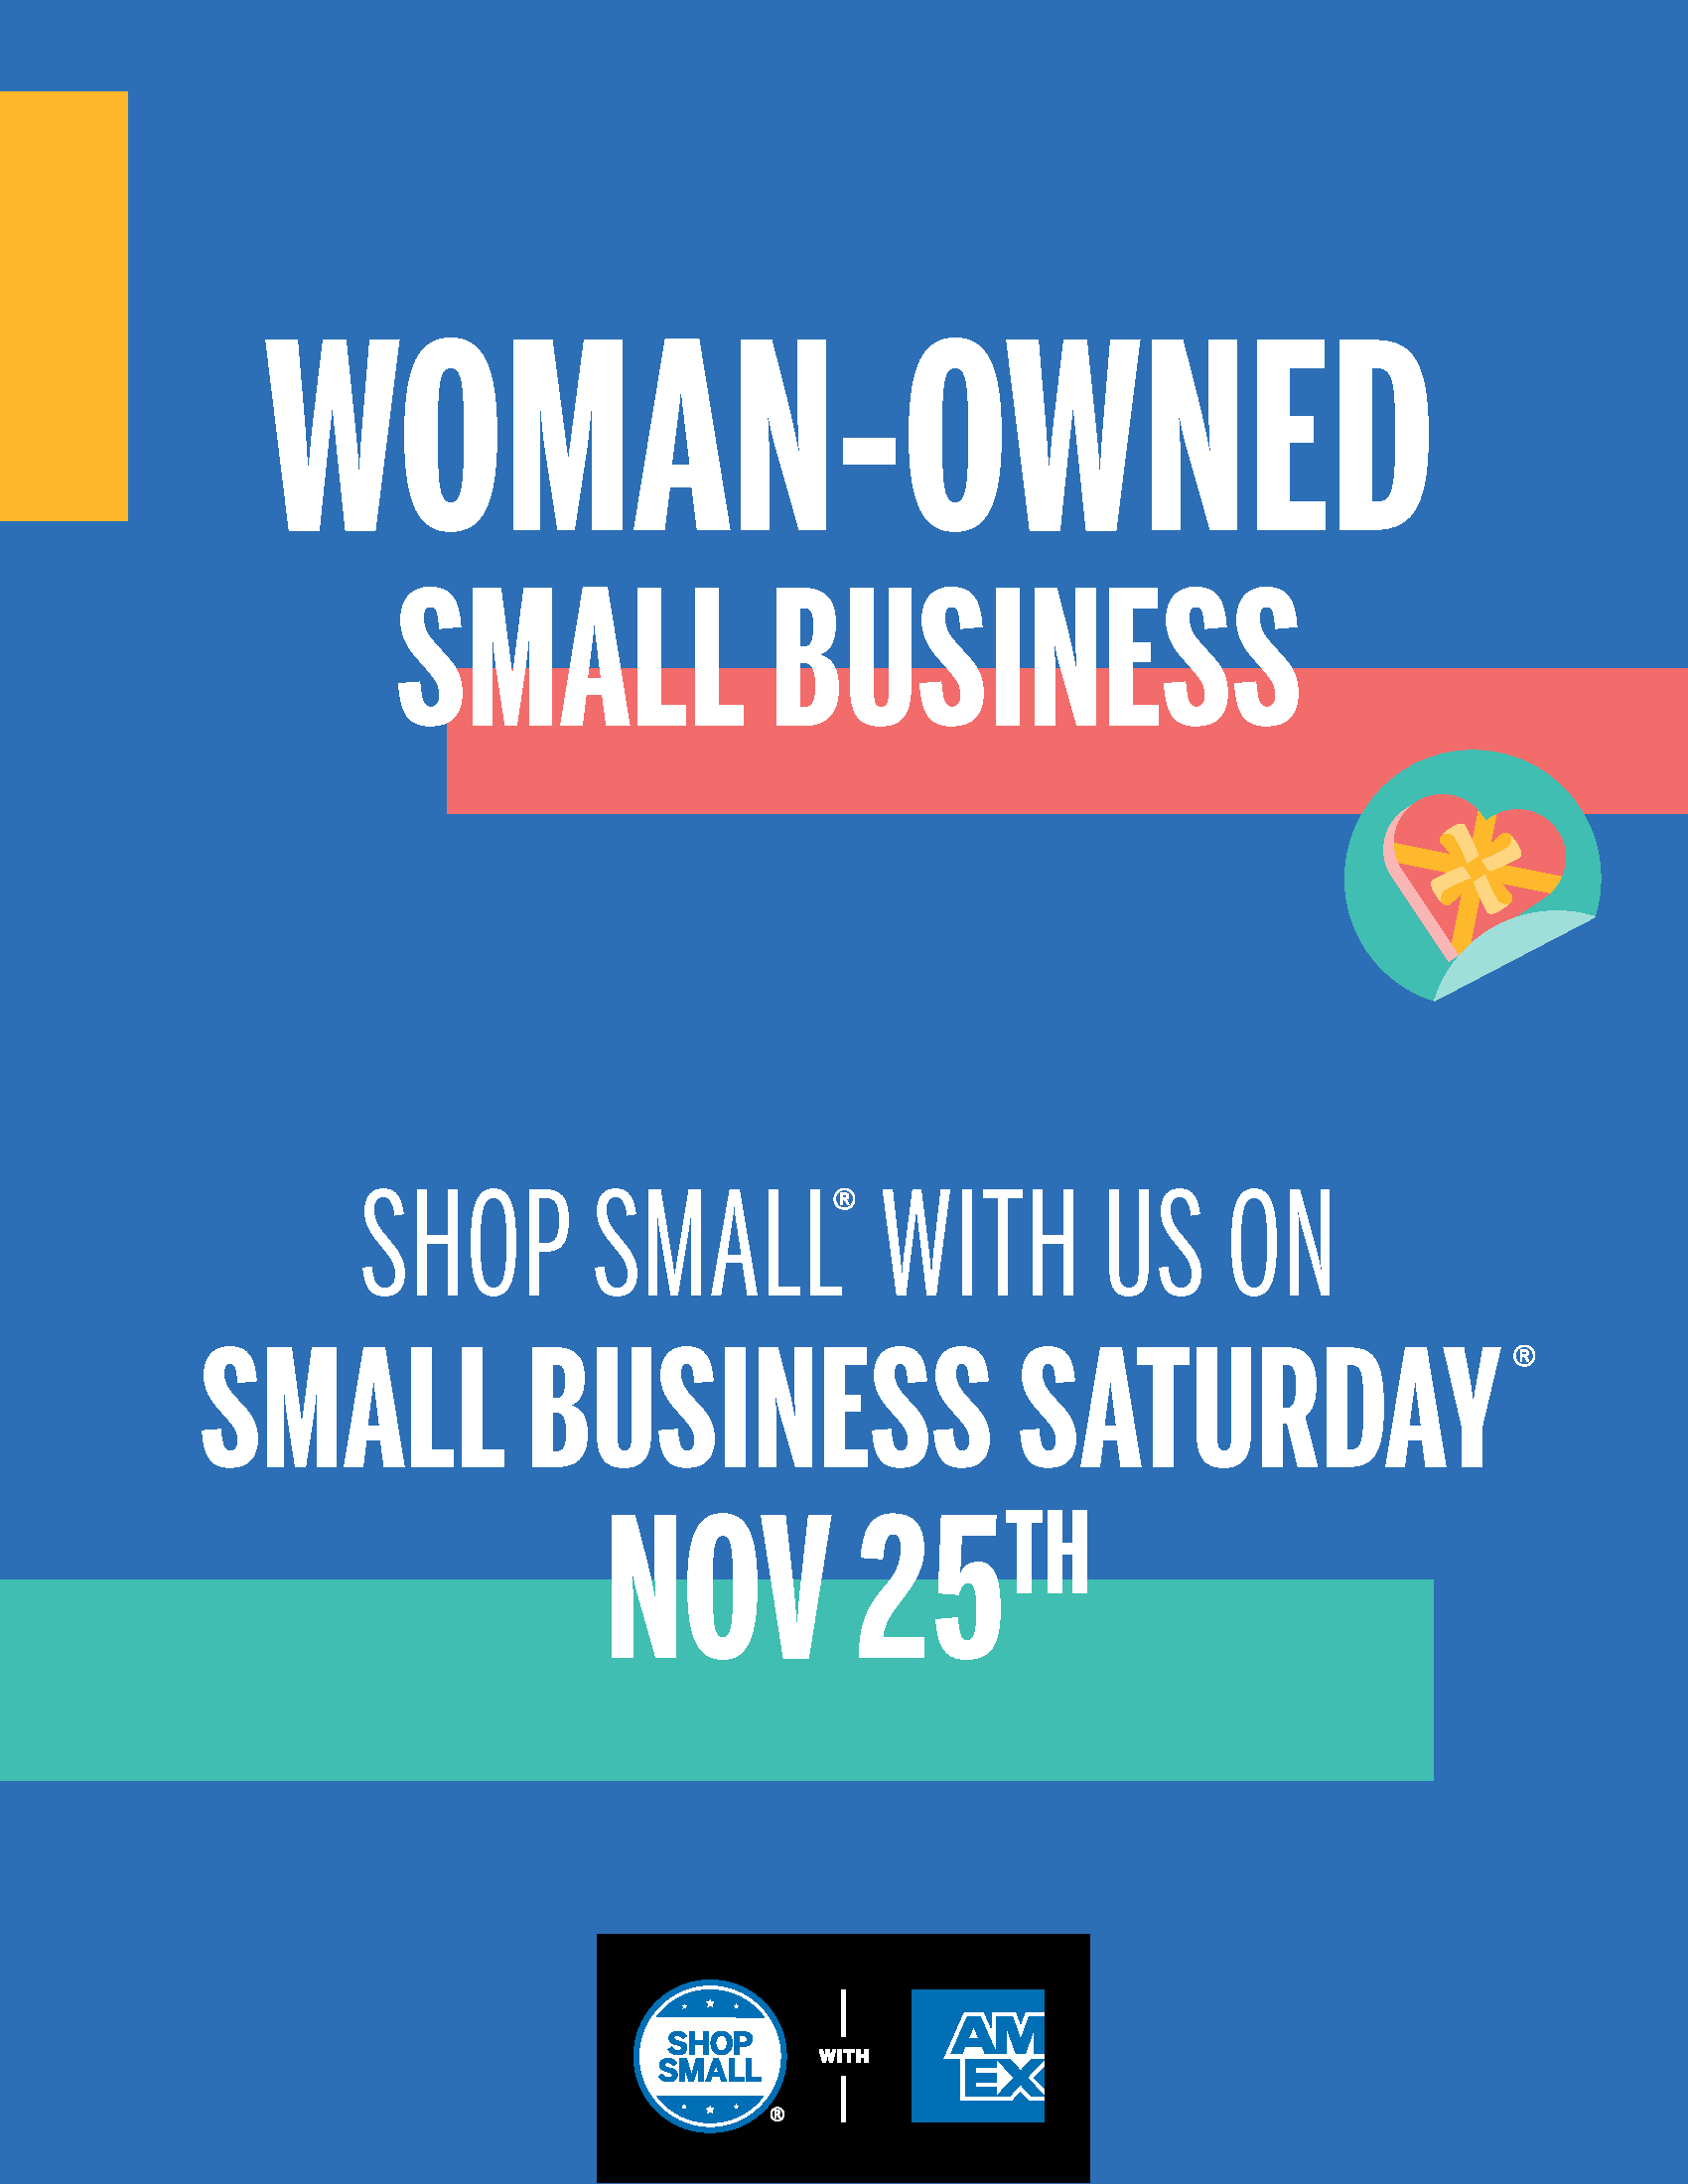 Thumbnail image of Poster PDF that reads Woman-Owned Small Business; Shop Small with us on Small Business Saturday Nov 25th and includes the Shop Small with Amex logo